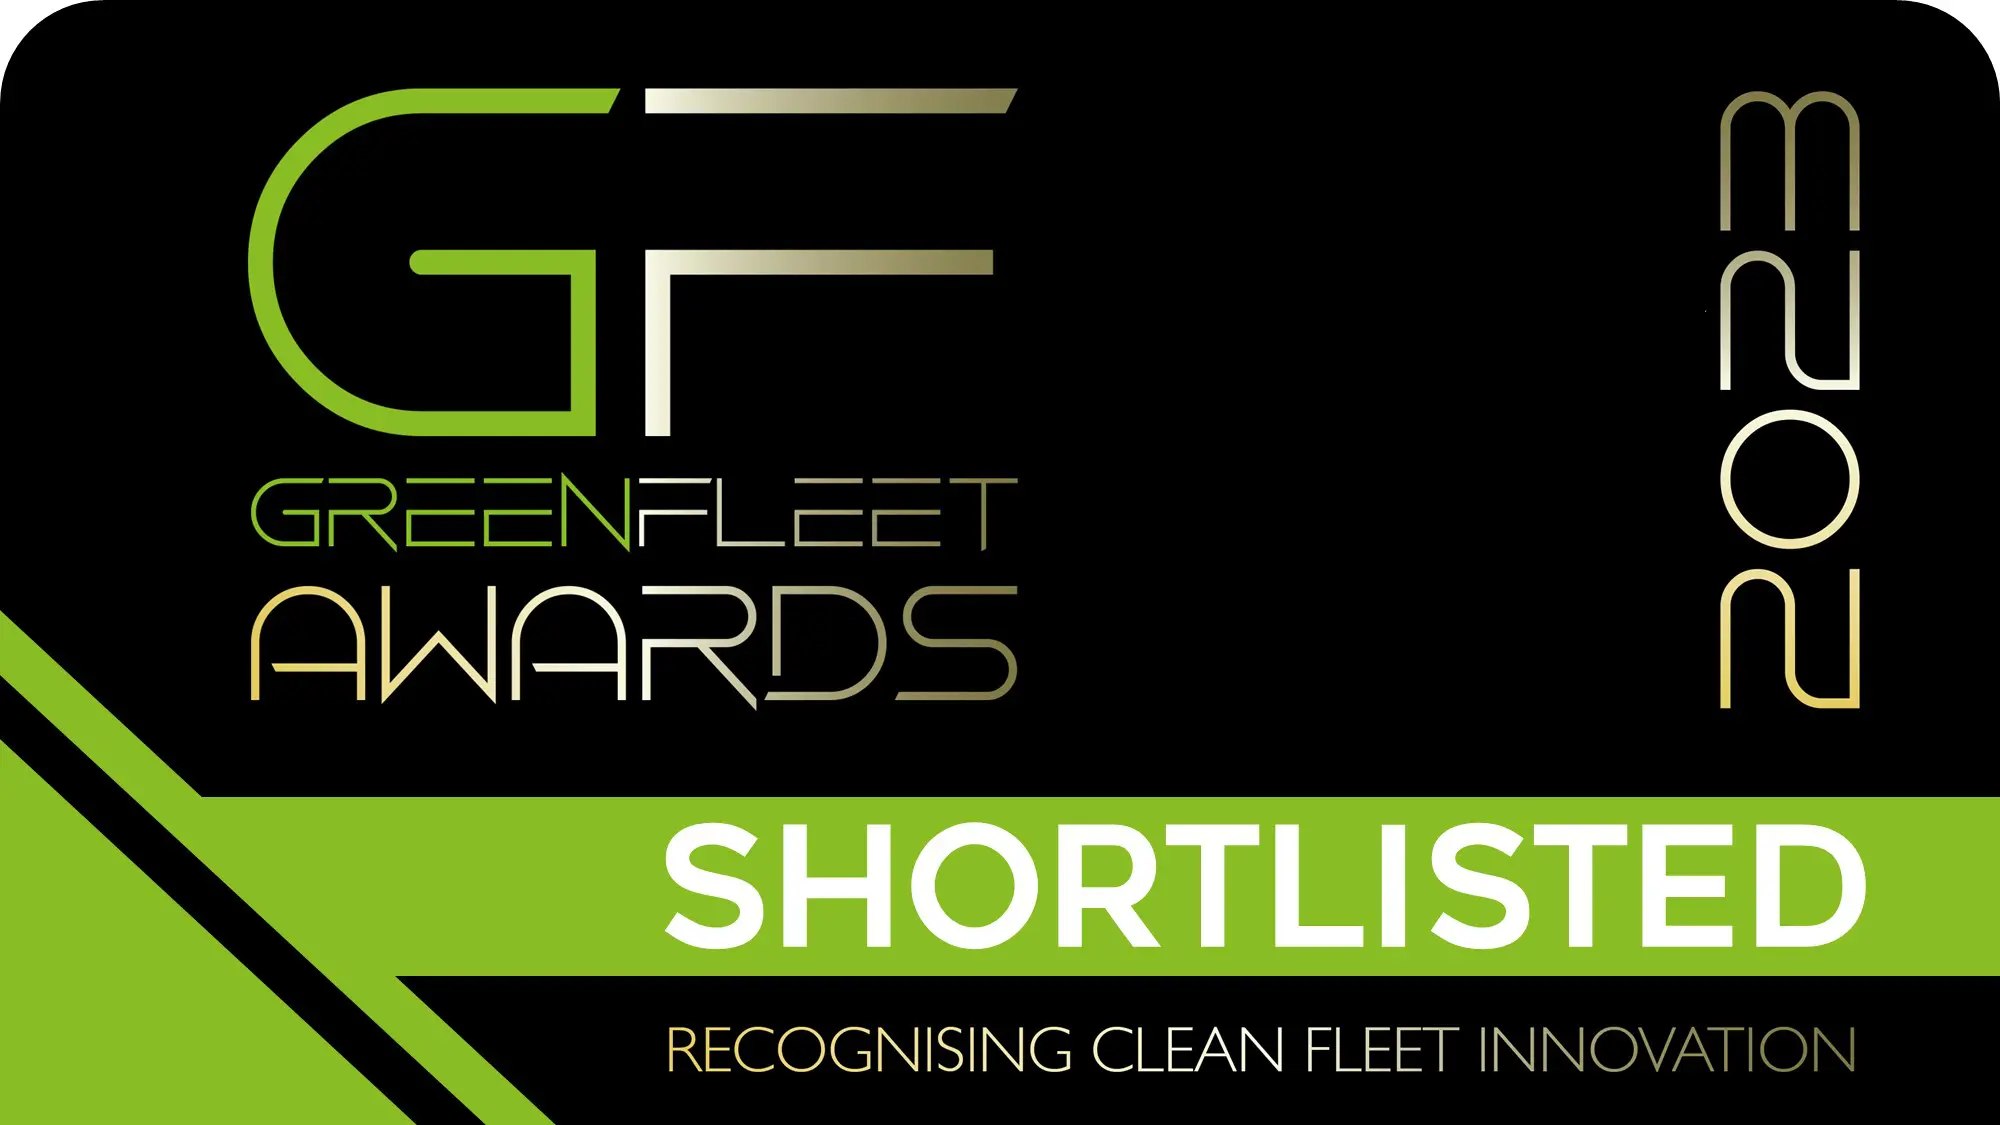 Grundon is the only waste company to have made the shortlist for Private Sector - Commercial Fleet of the Year Award